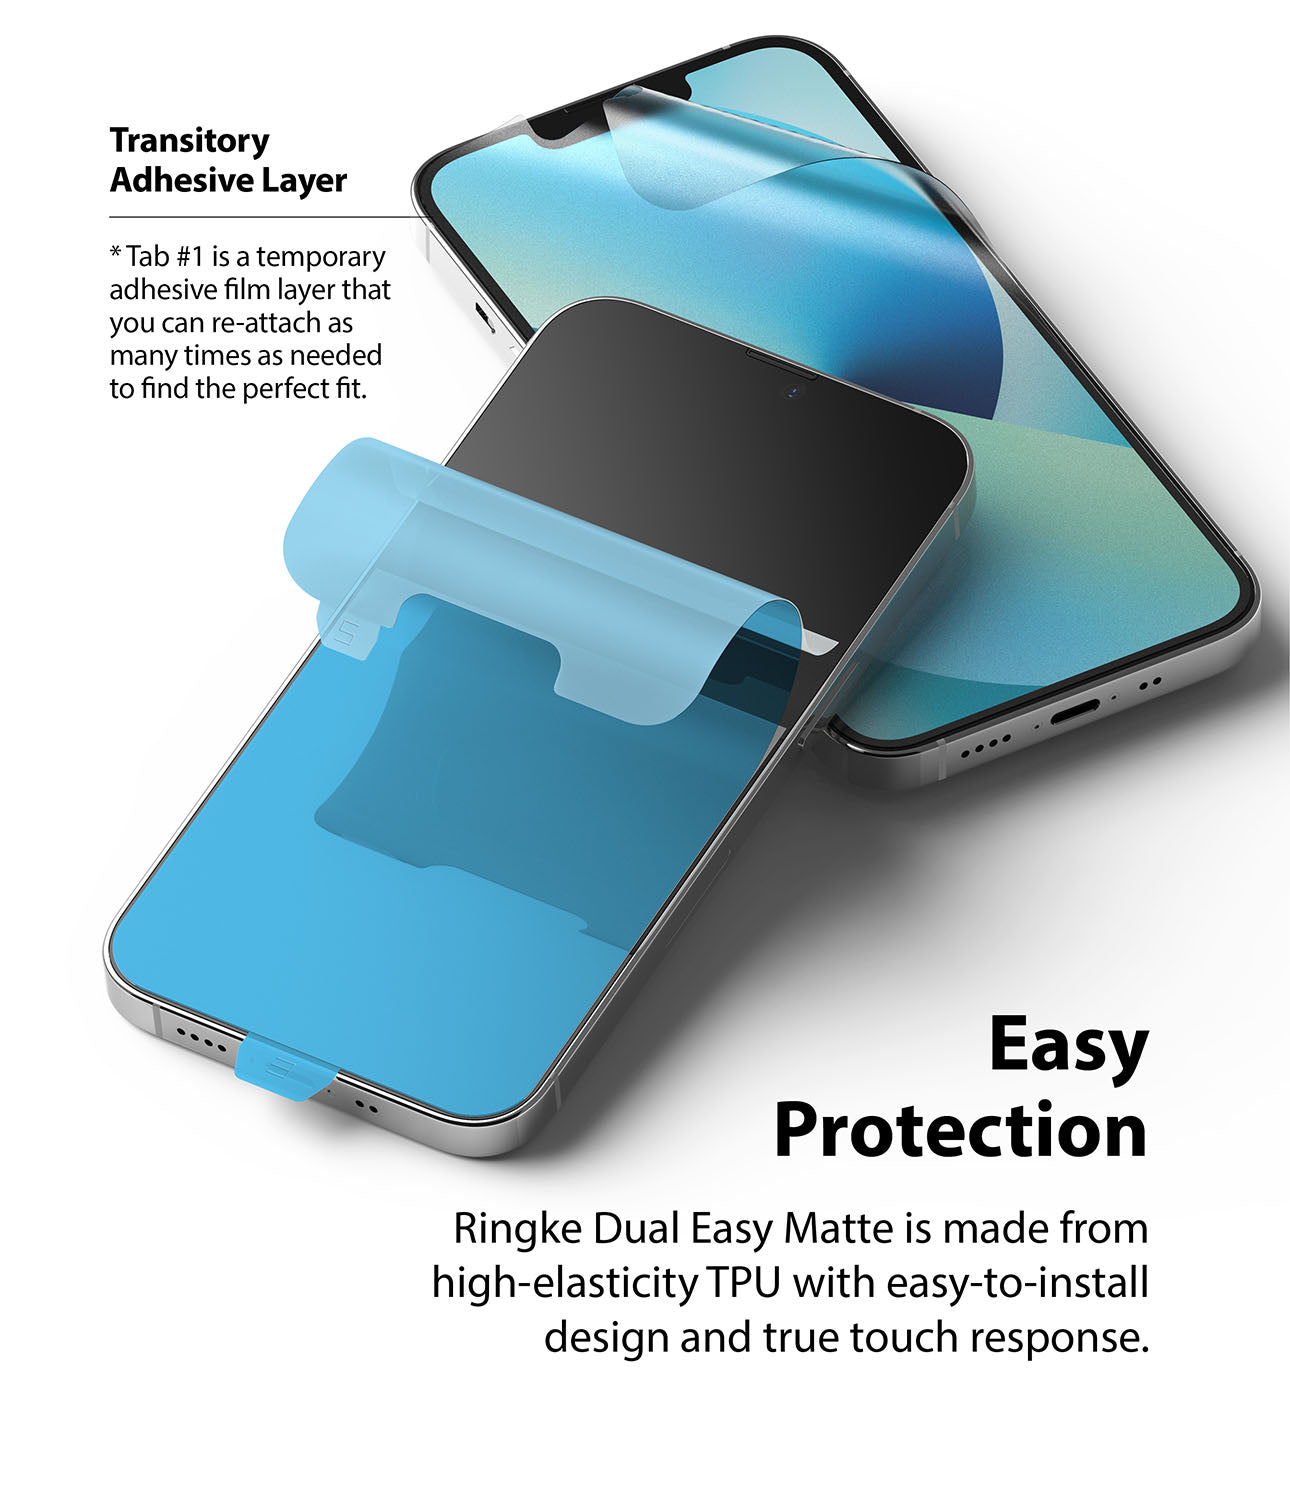 iPhone 13 Mini Screen Protector | Dual Easy Film Matte - Transitory Adhesive Layer. Easy Protection